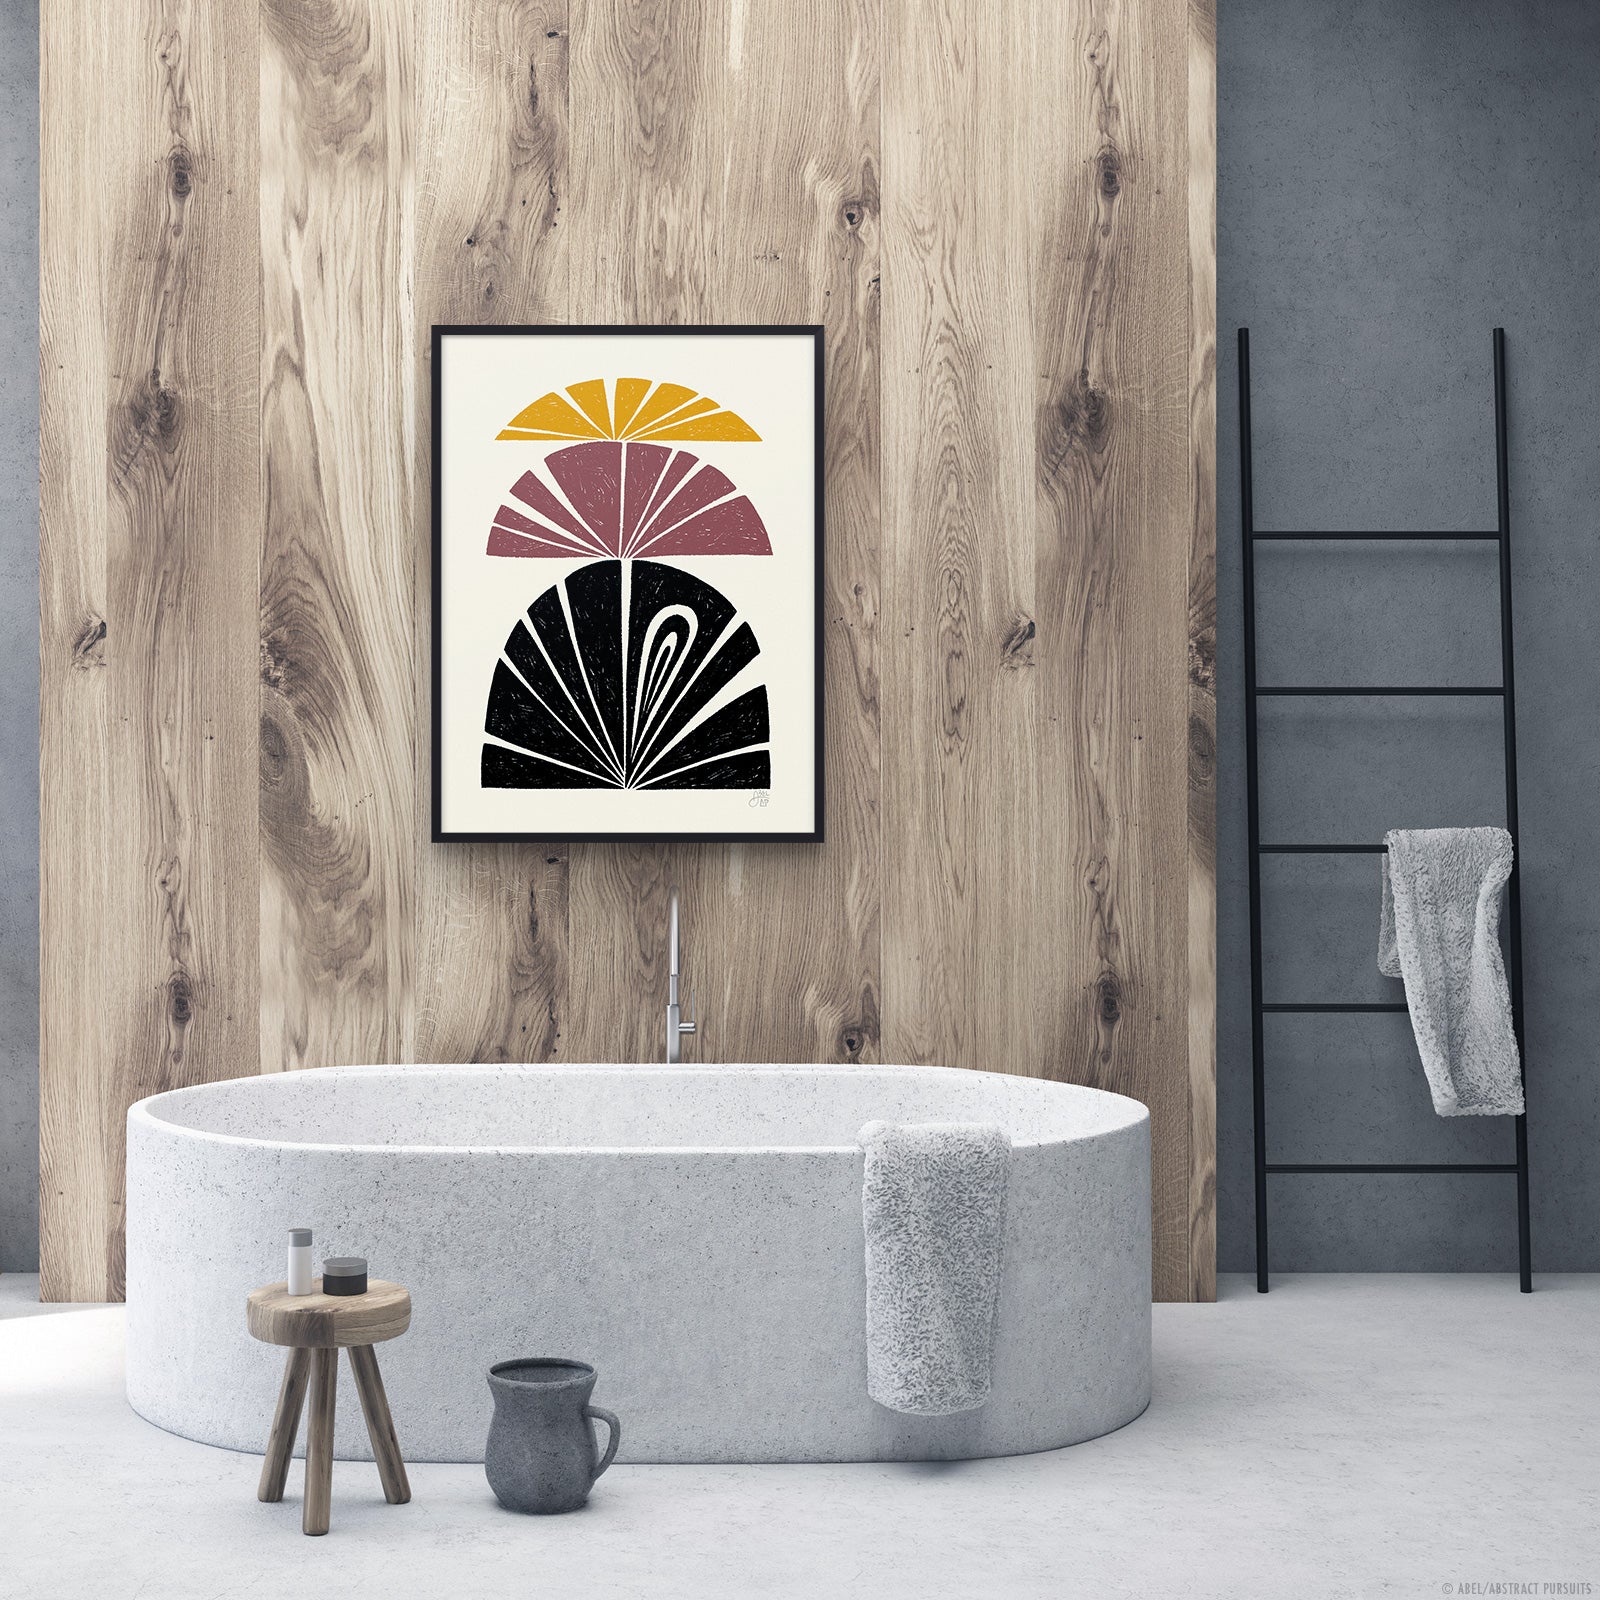 yellow, purple and black Abstract plant flower stack design framed in room, bamboo paper art print by Erik Abel